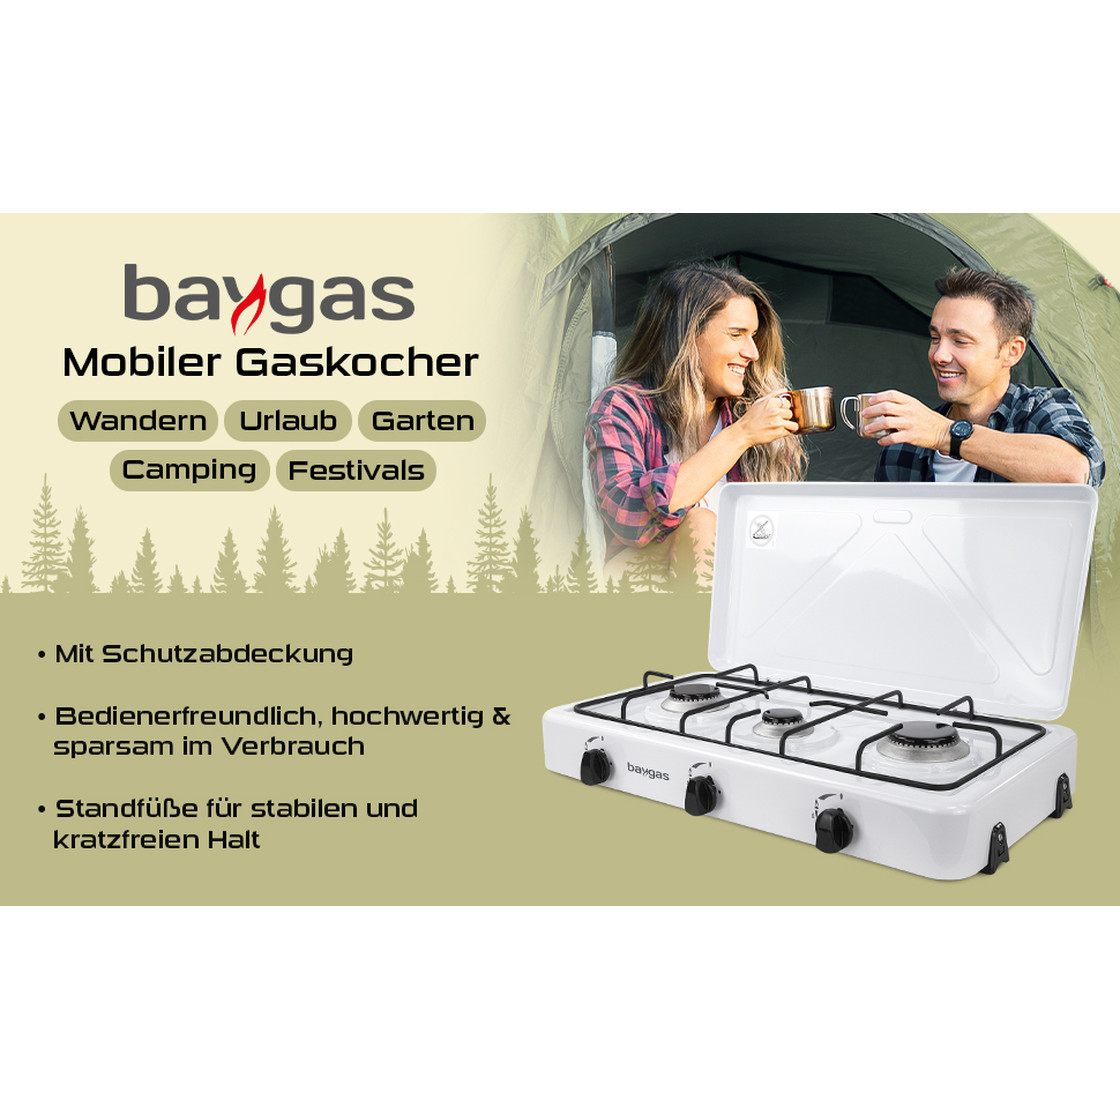 Baygas Mobile Gas Cooker 3-flame white